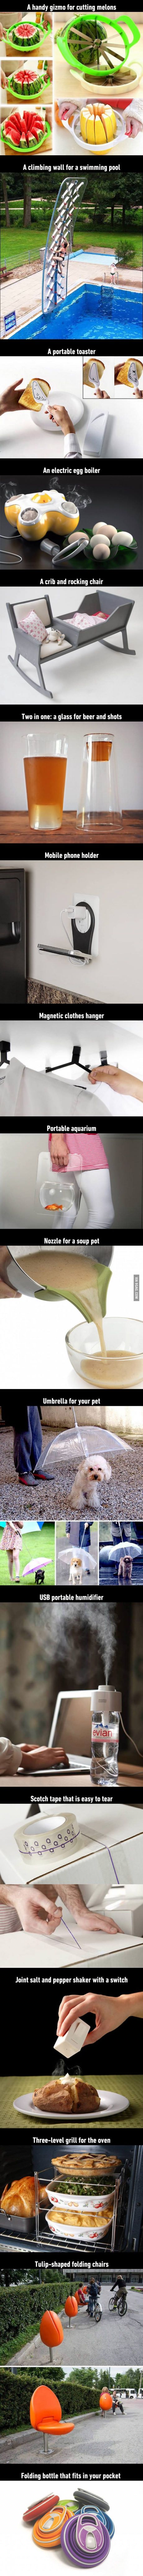 17 new inventions we need!